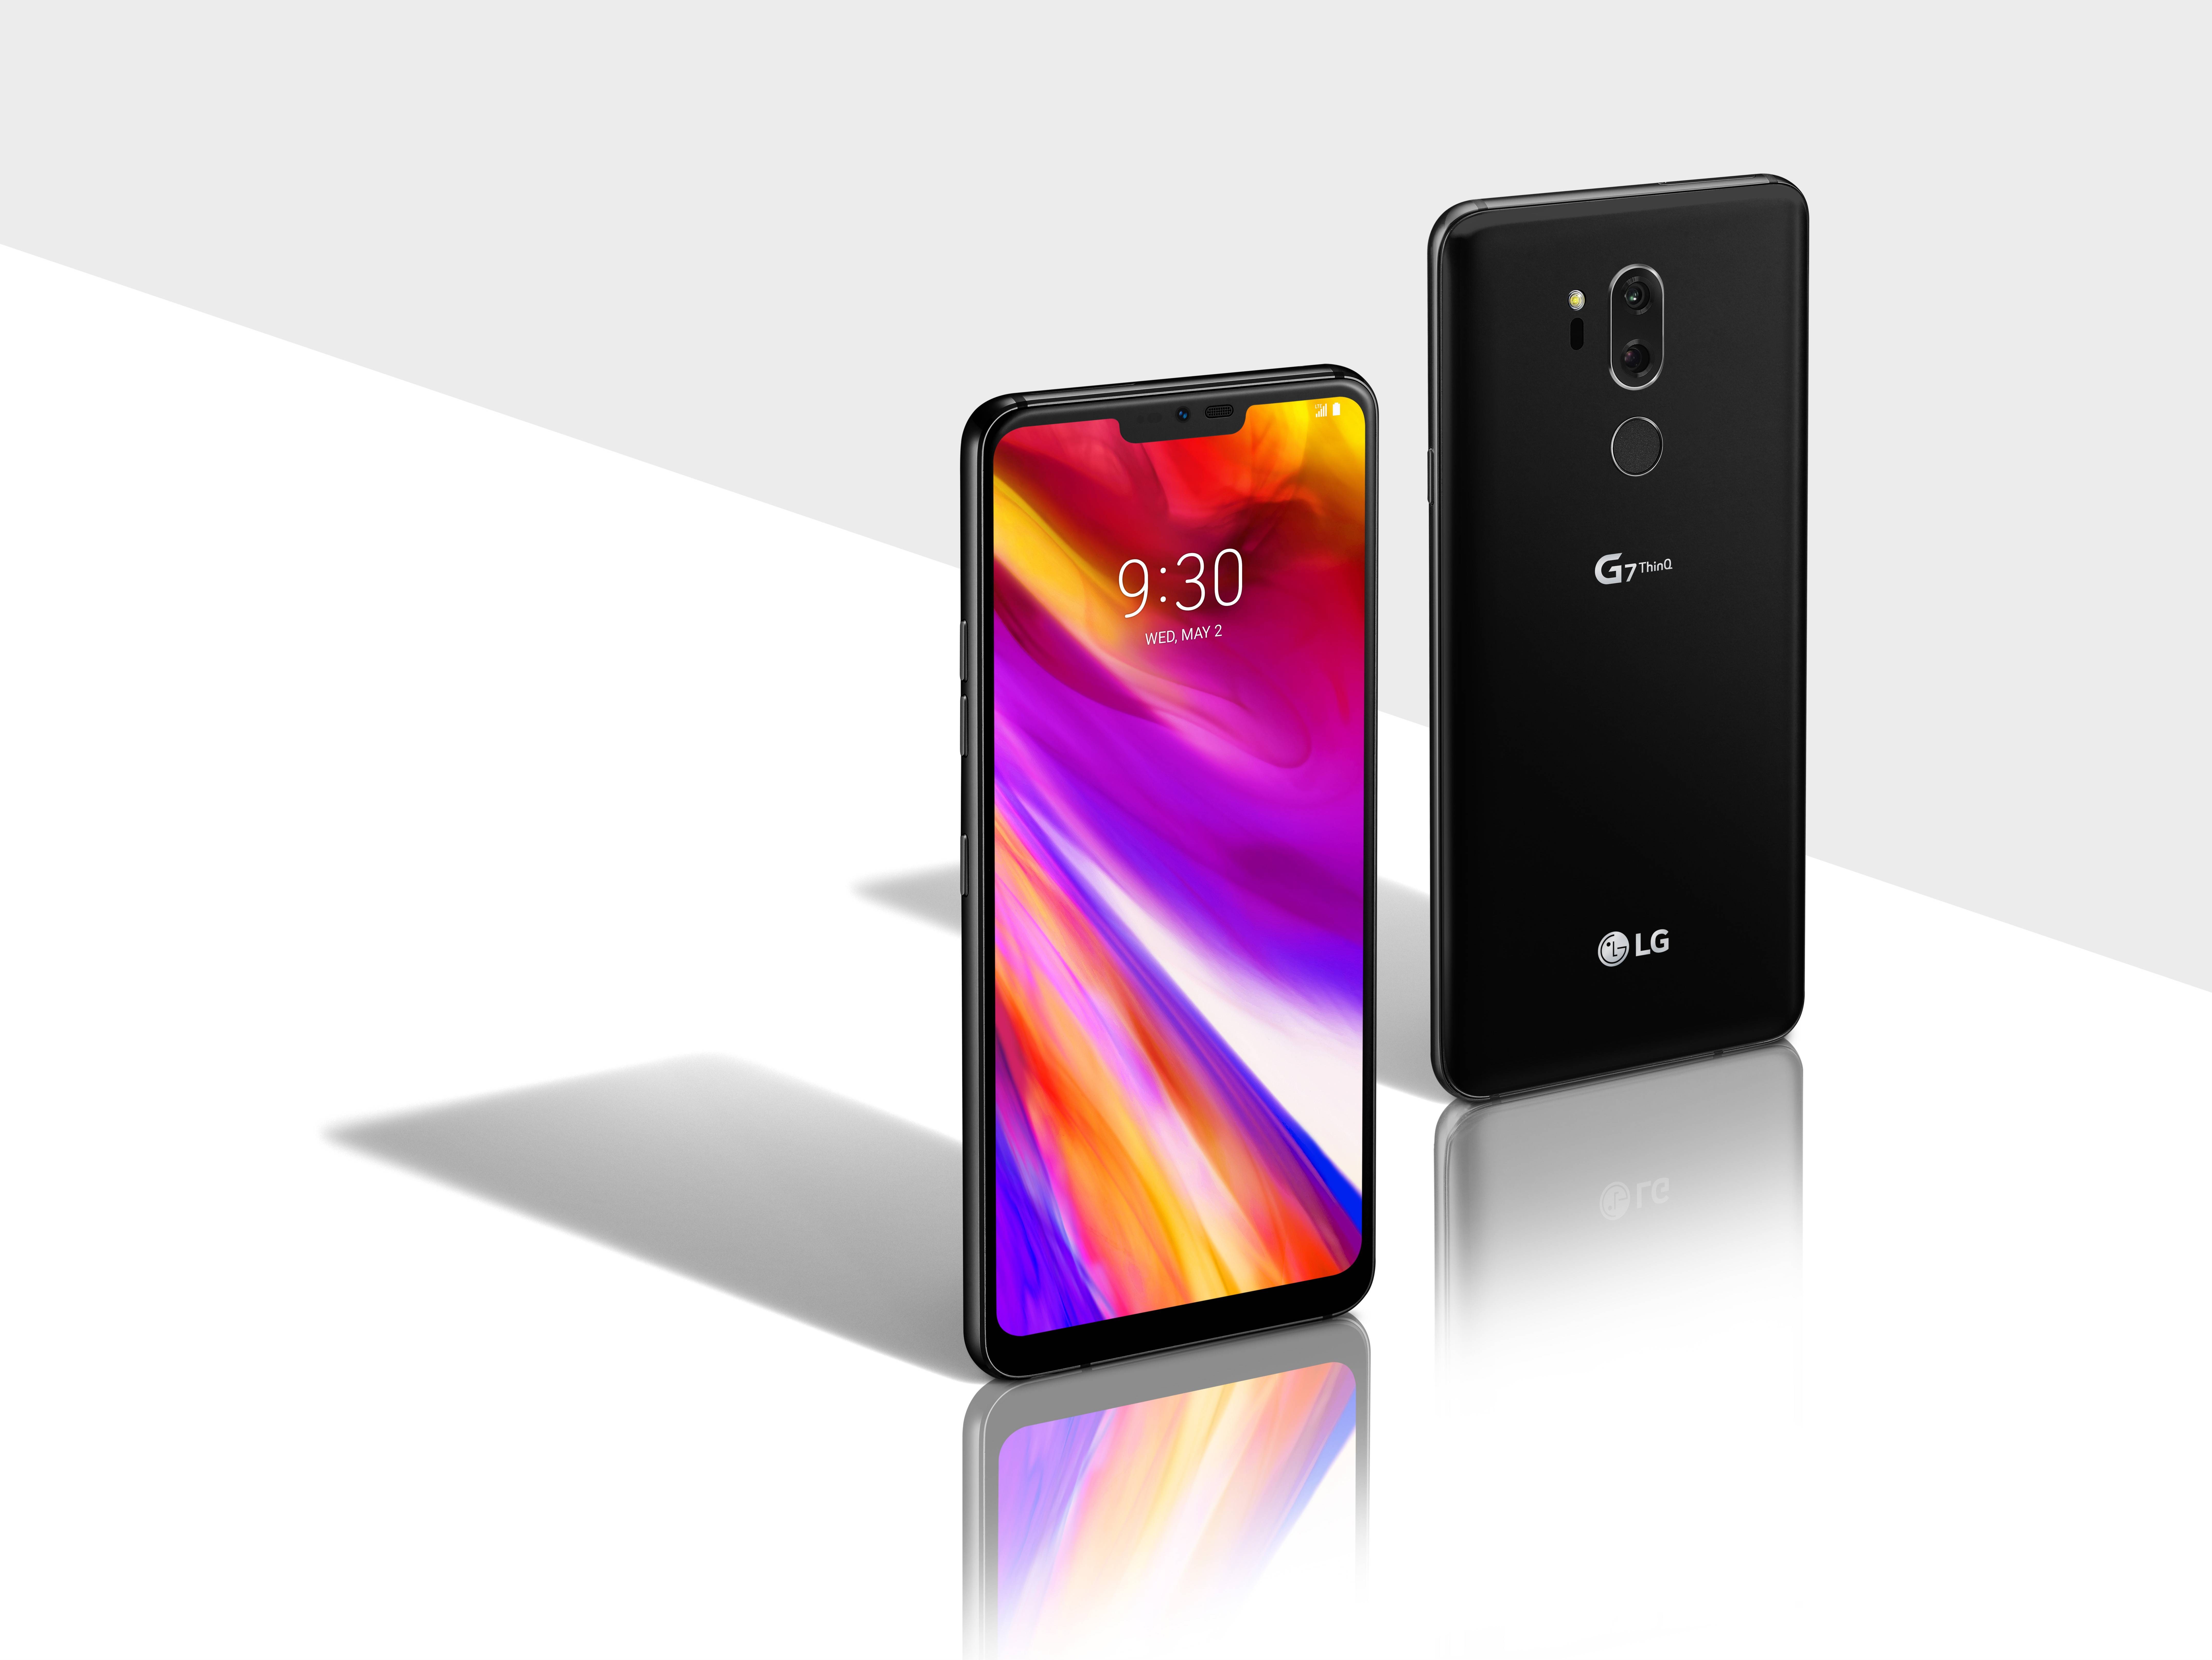 The front and rear view of the LG G7 ThinQ in New Aurora Black